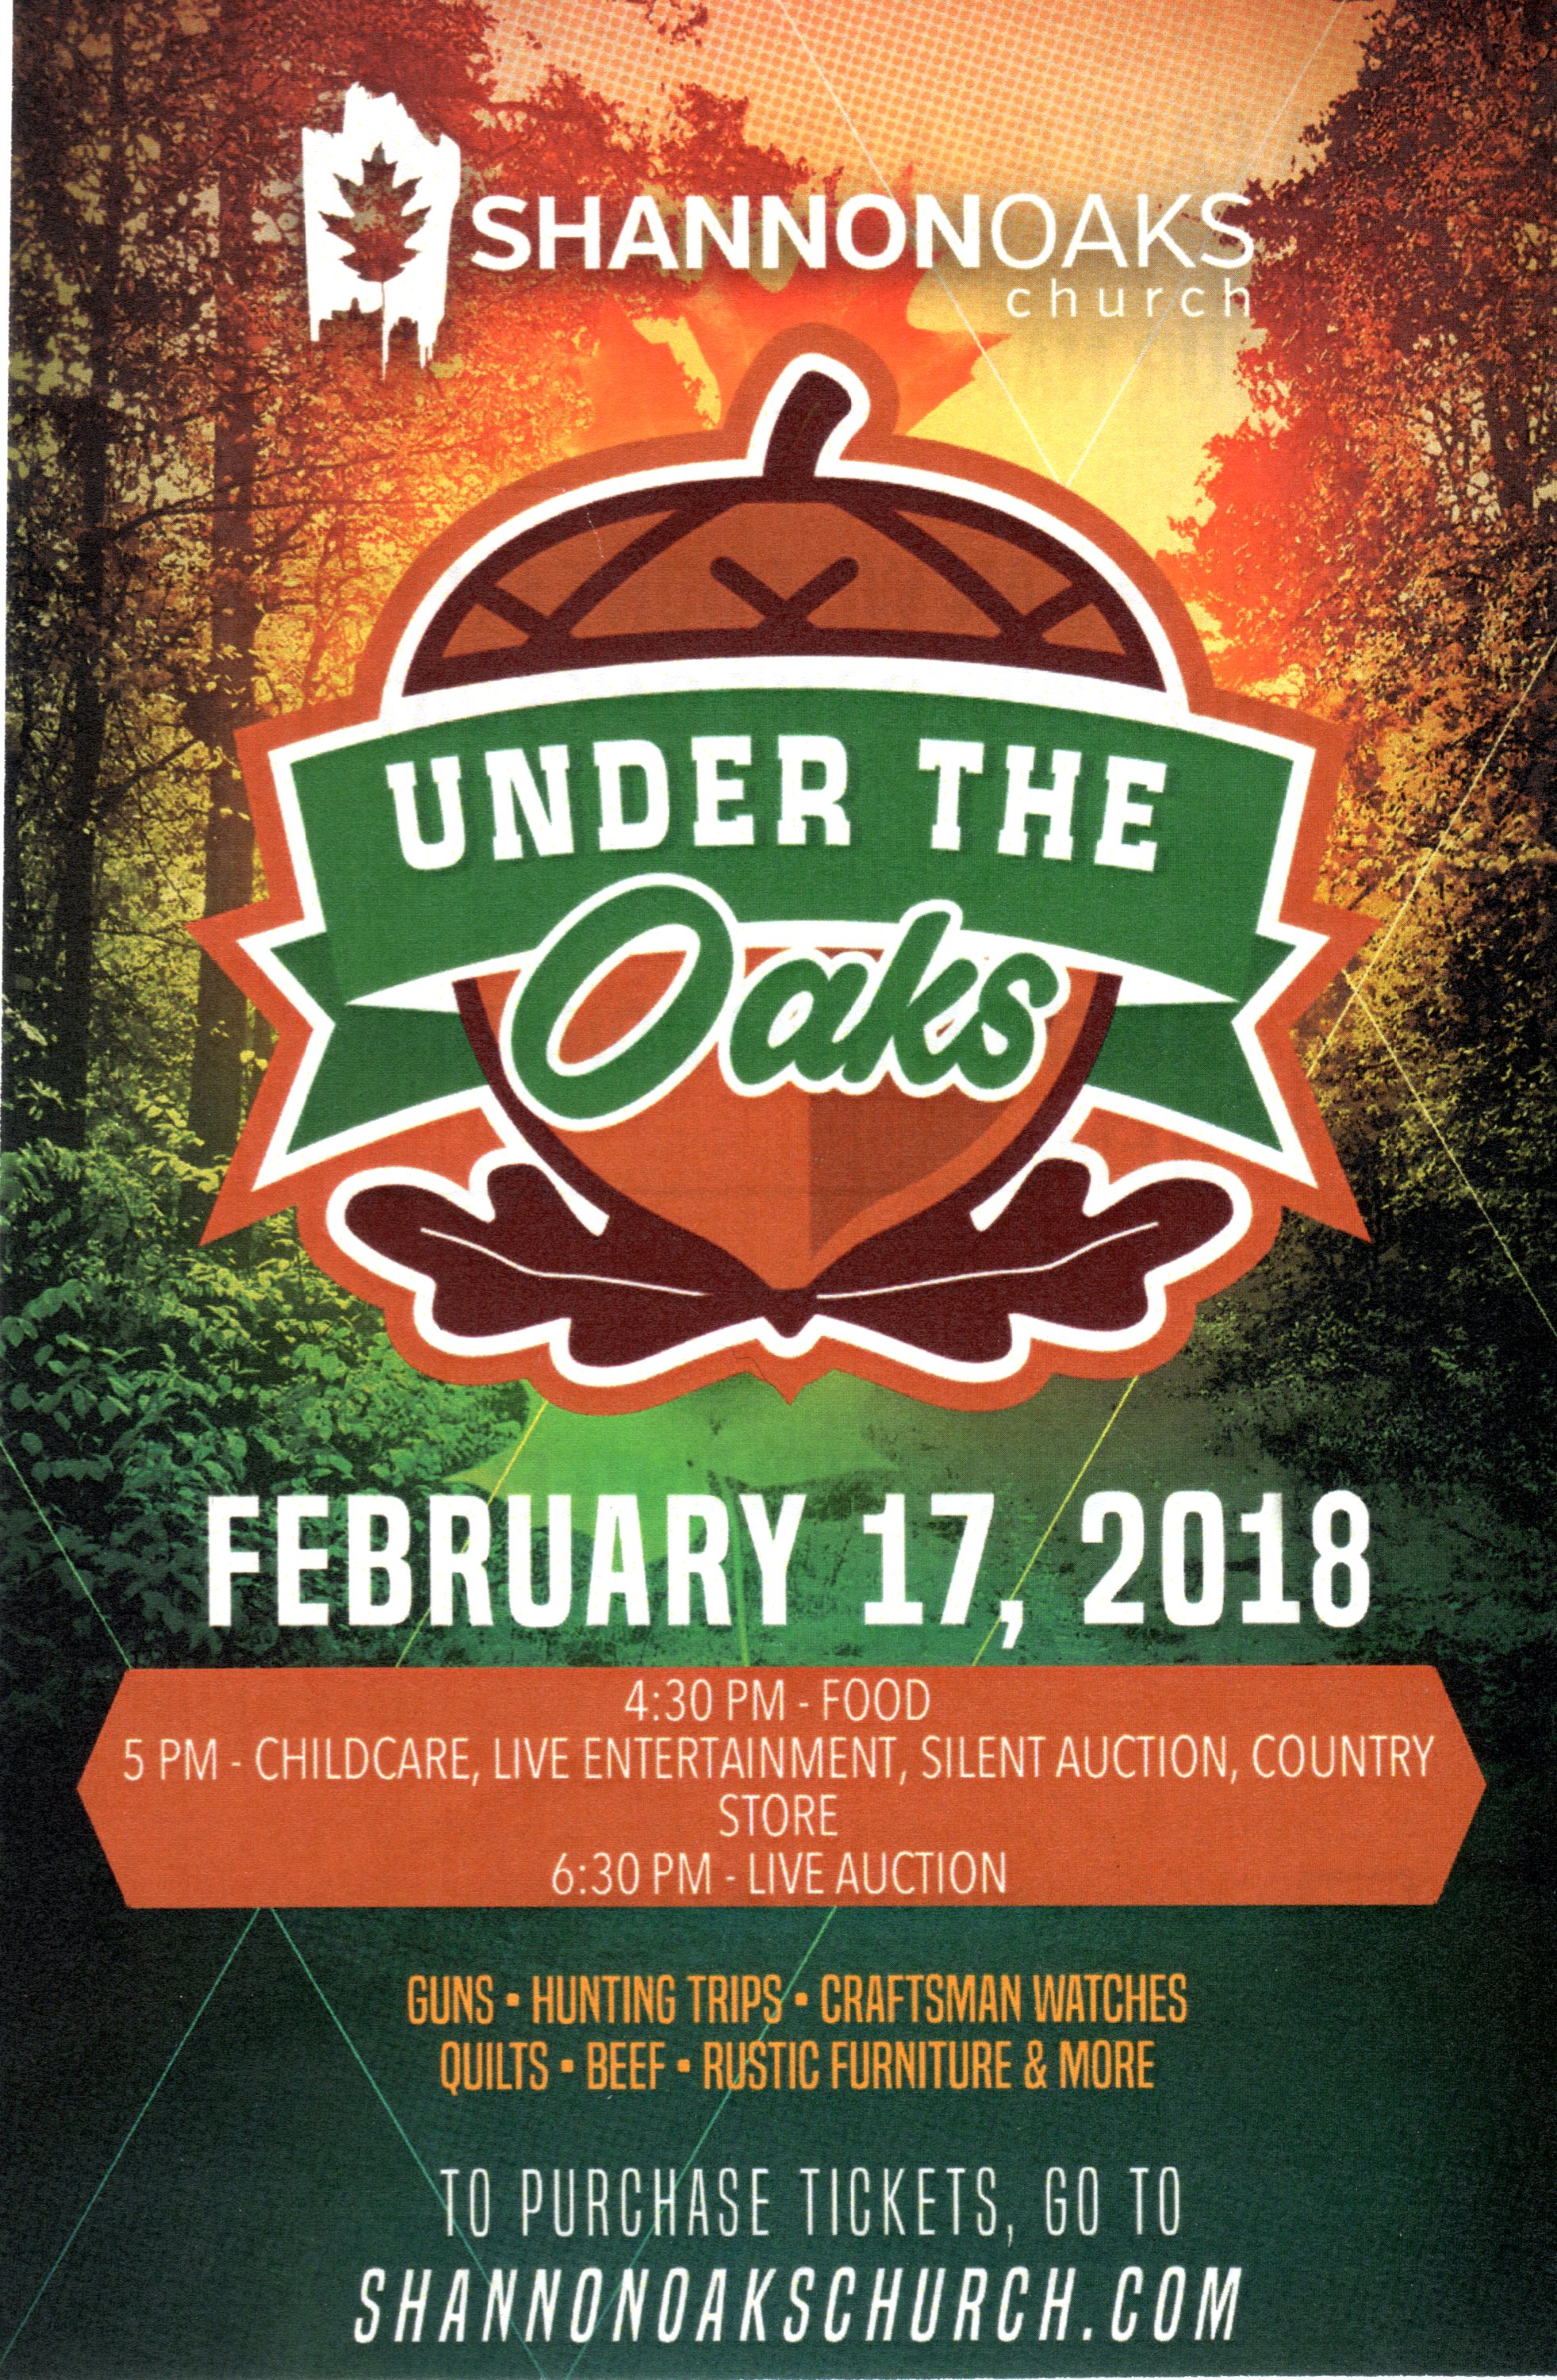 Under the Oaks at Shannon Oaks Church on February 17th Features Live Entertainment and Auction